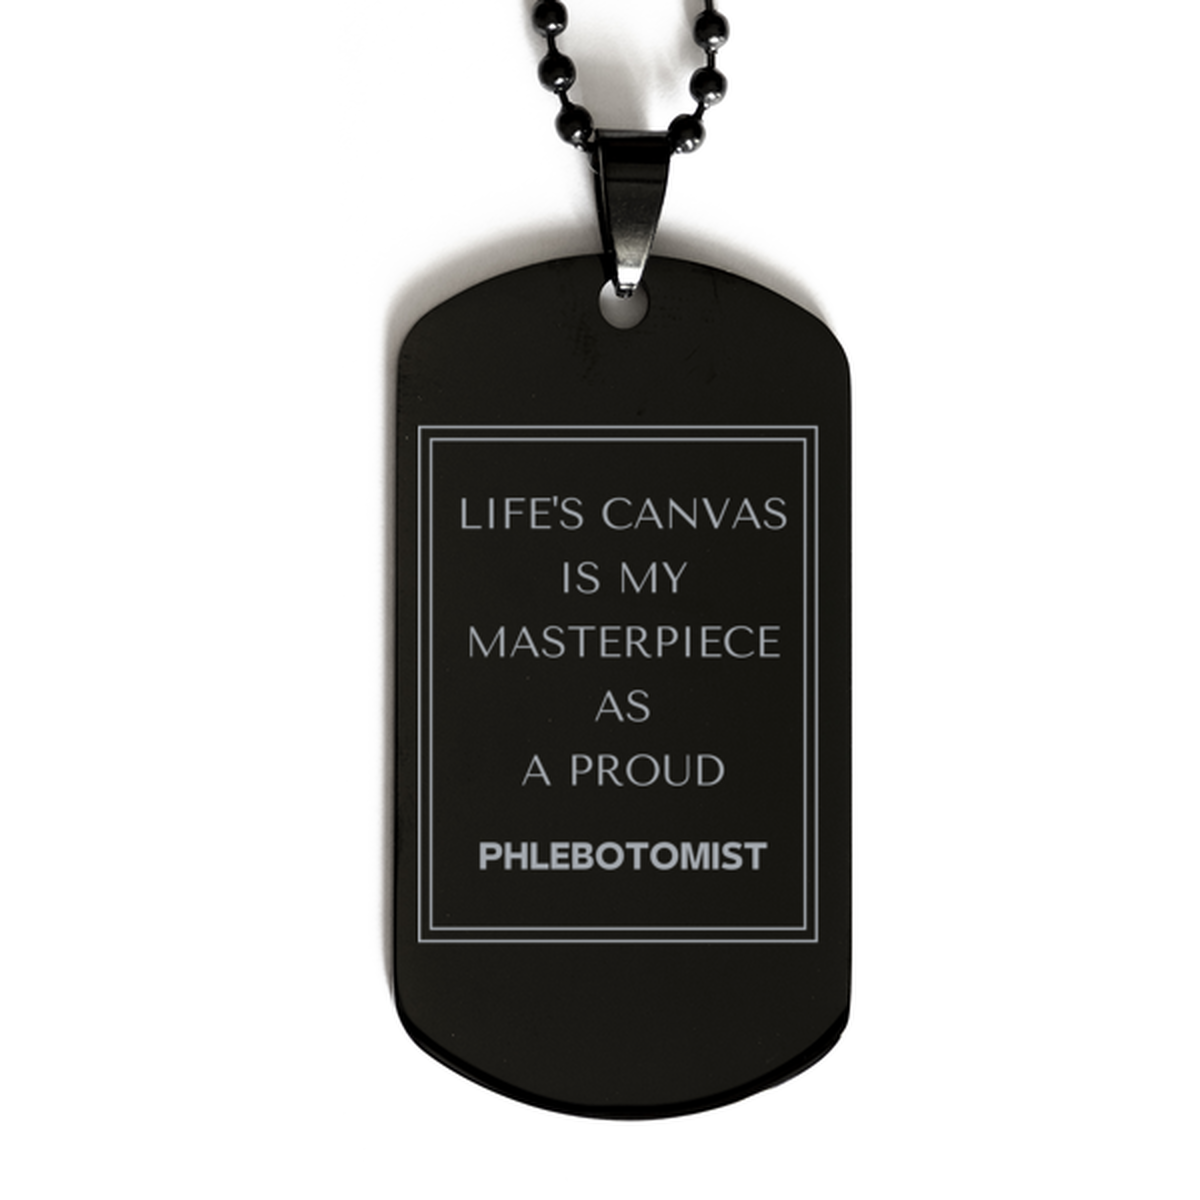 Proud Phlebotomist Gifts, Life's canvas is my masterpiece, Epic Birthday Christmas Unique Black Dog Tag For Phlebotomist, Coworkers, Men, Women, Friends